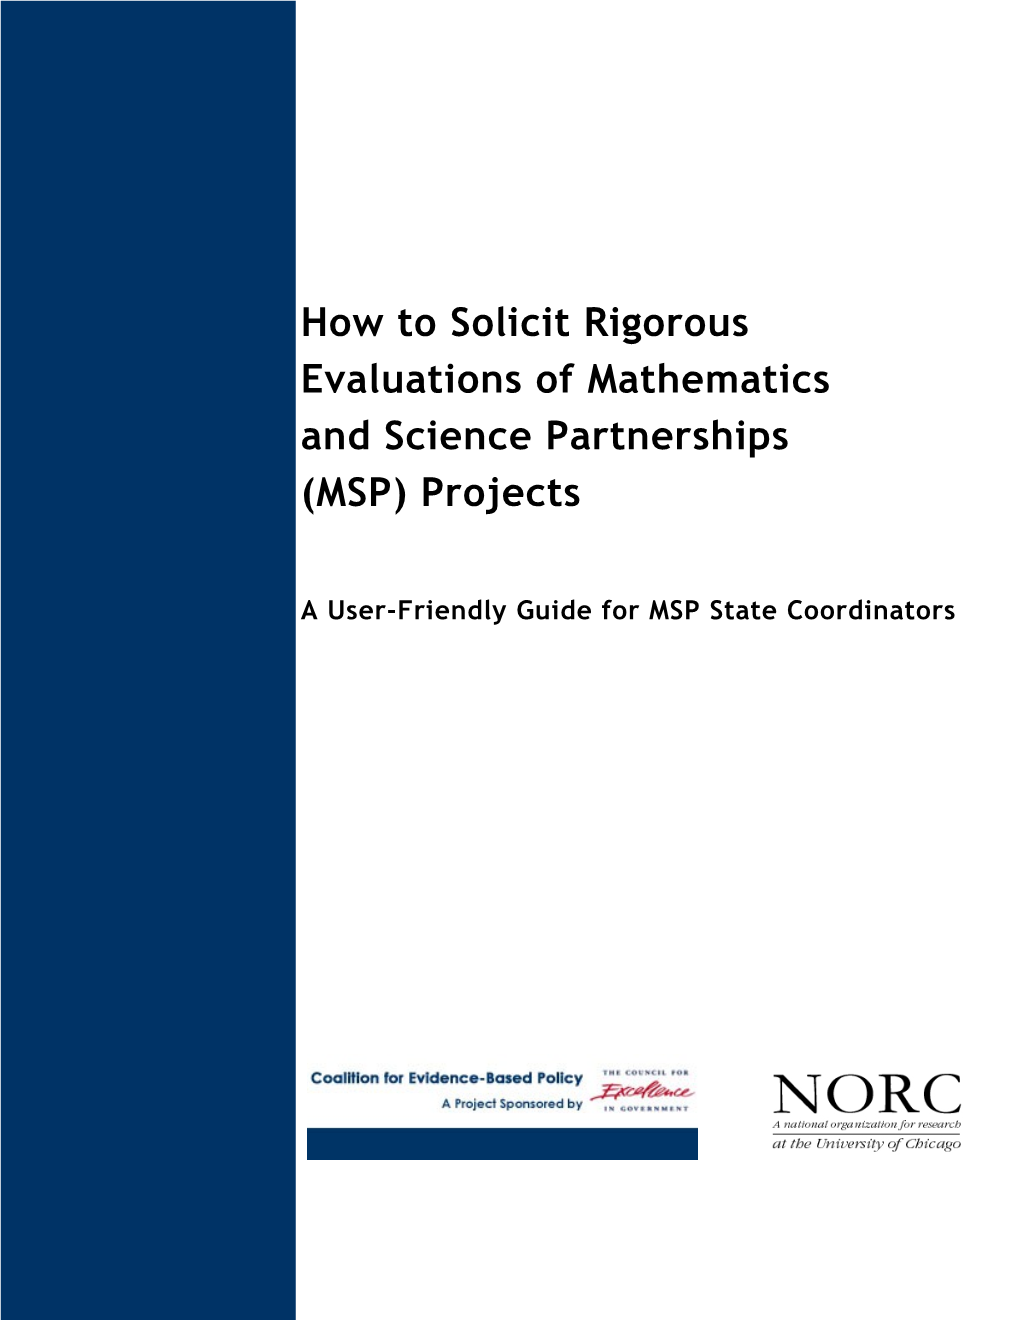 How to Solicit Rigorous Evaluations of Mathematics and Science Partnerships (MSP) Projects